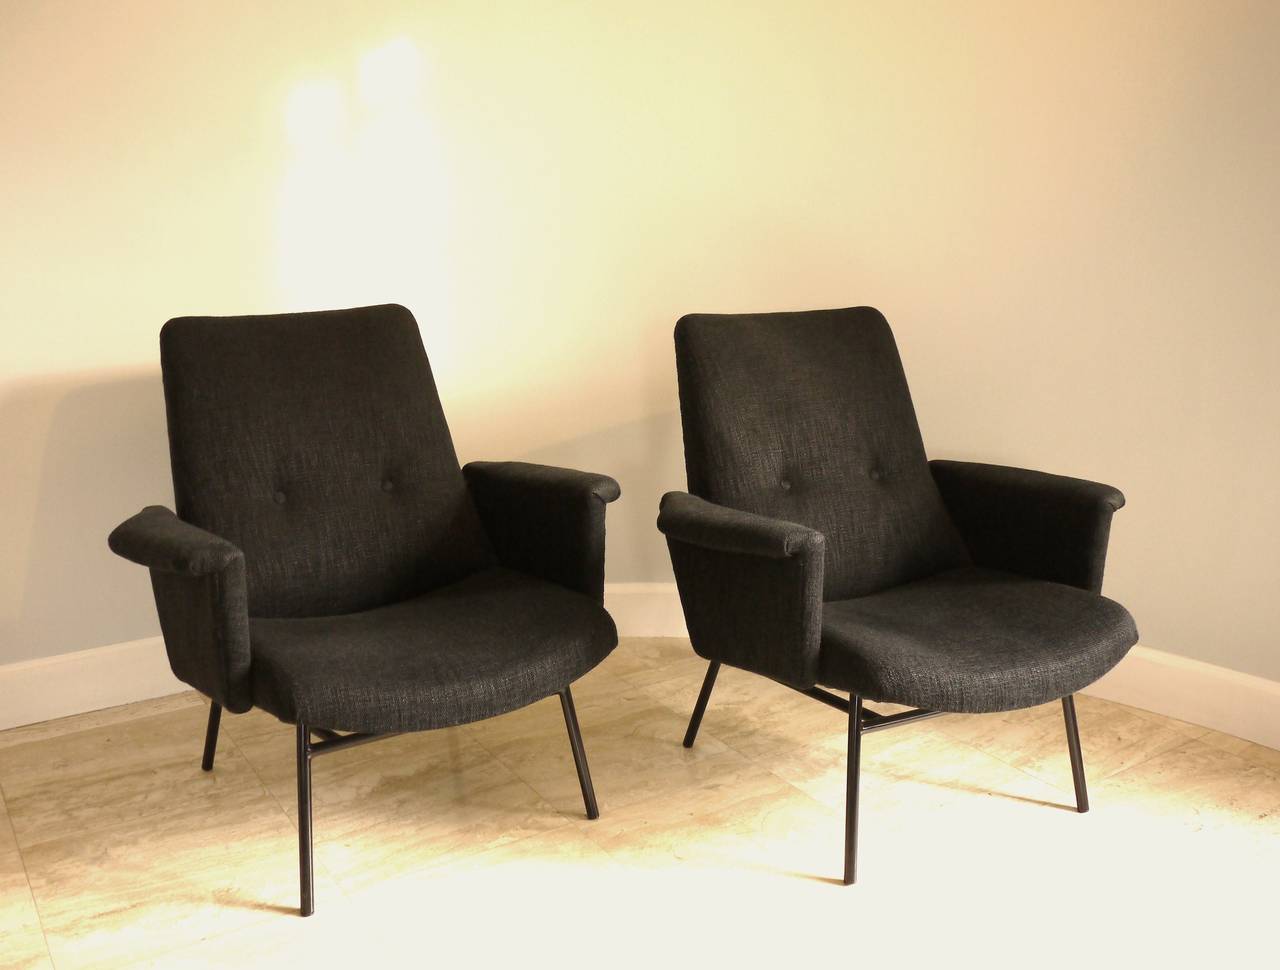 Pair of SK660 armchairs by Pierre Guariche for Steiner editor in 1953. New foam and dark grey wool upholstery.